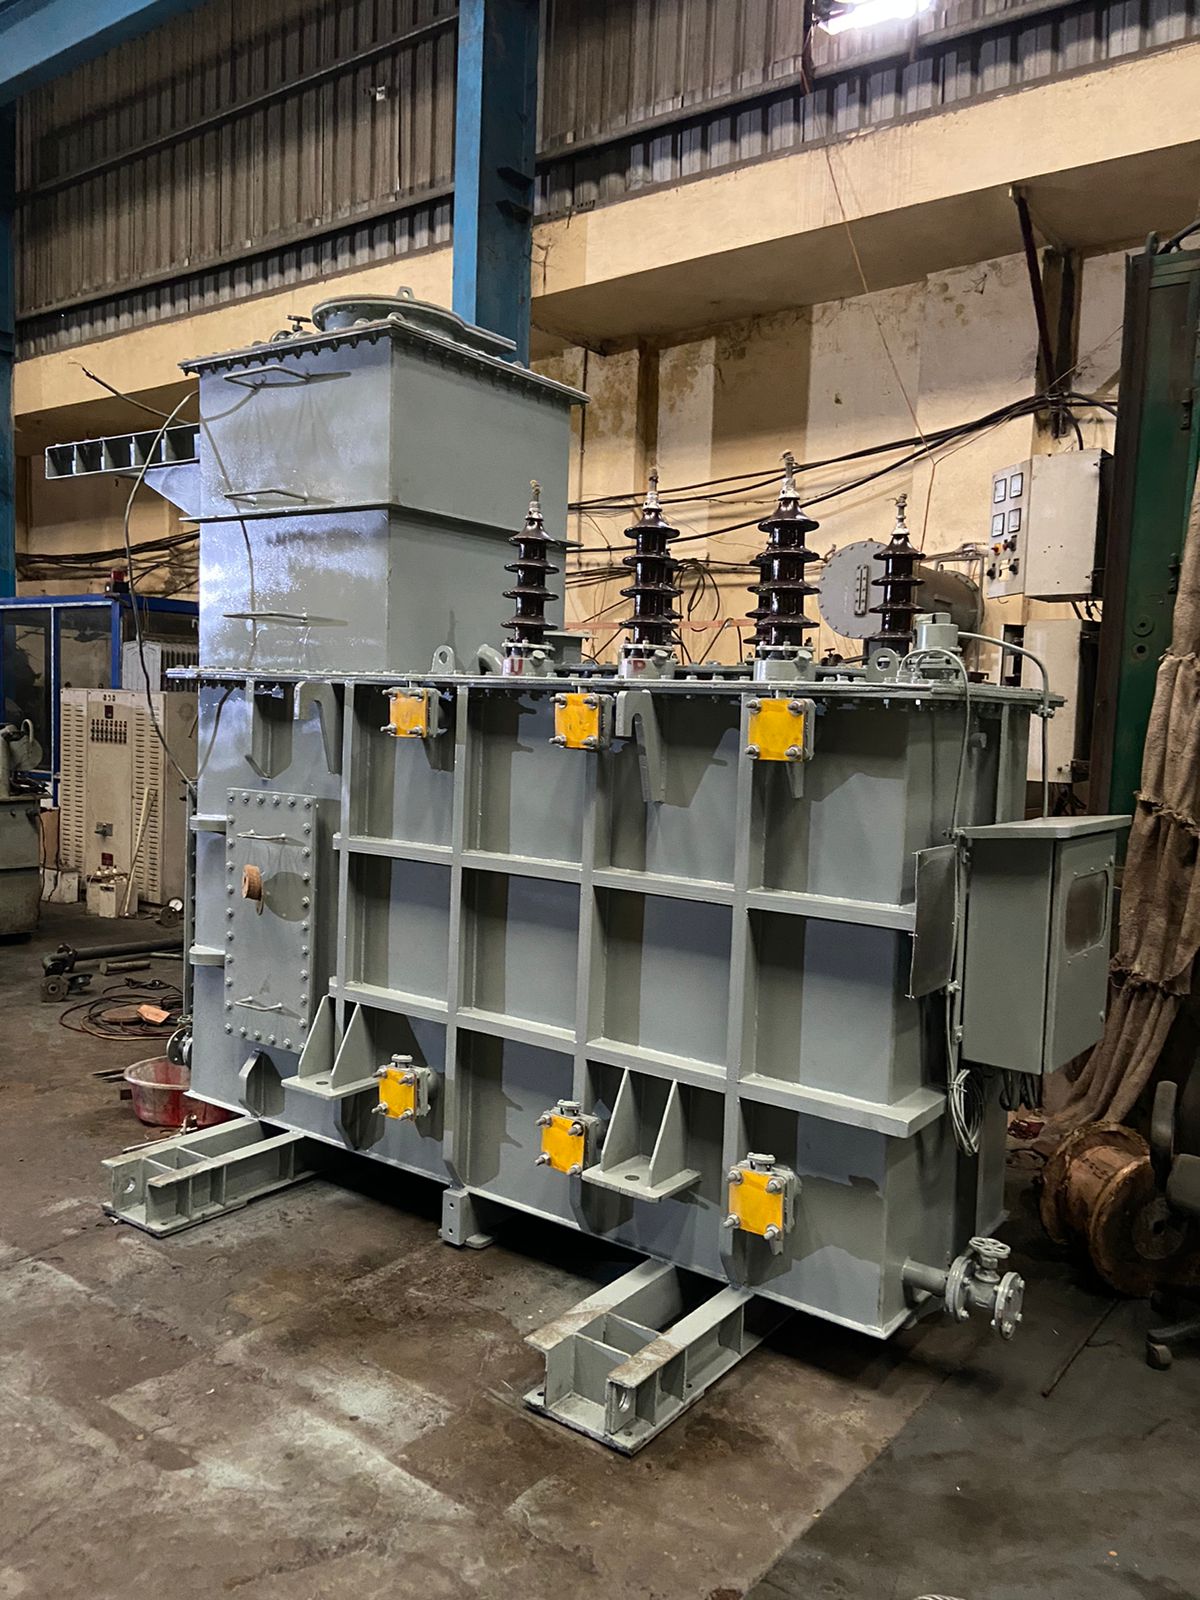 MAKPOWER-Transformer Manufacturer-30 Years of Experience